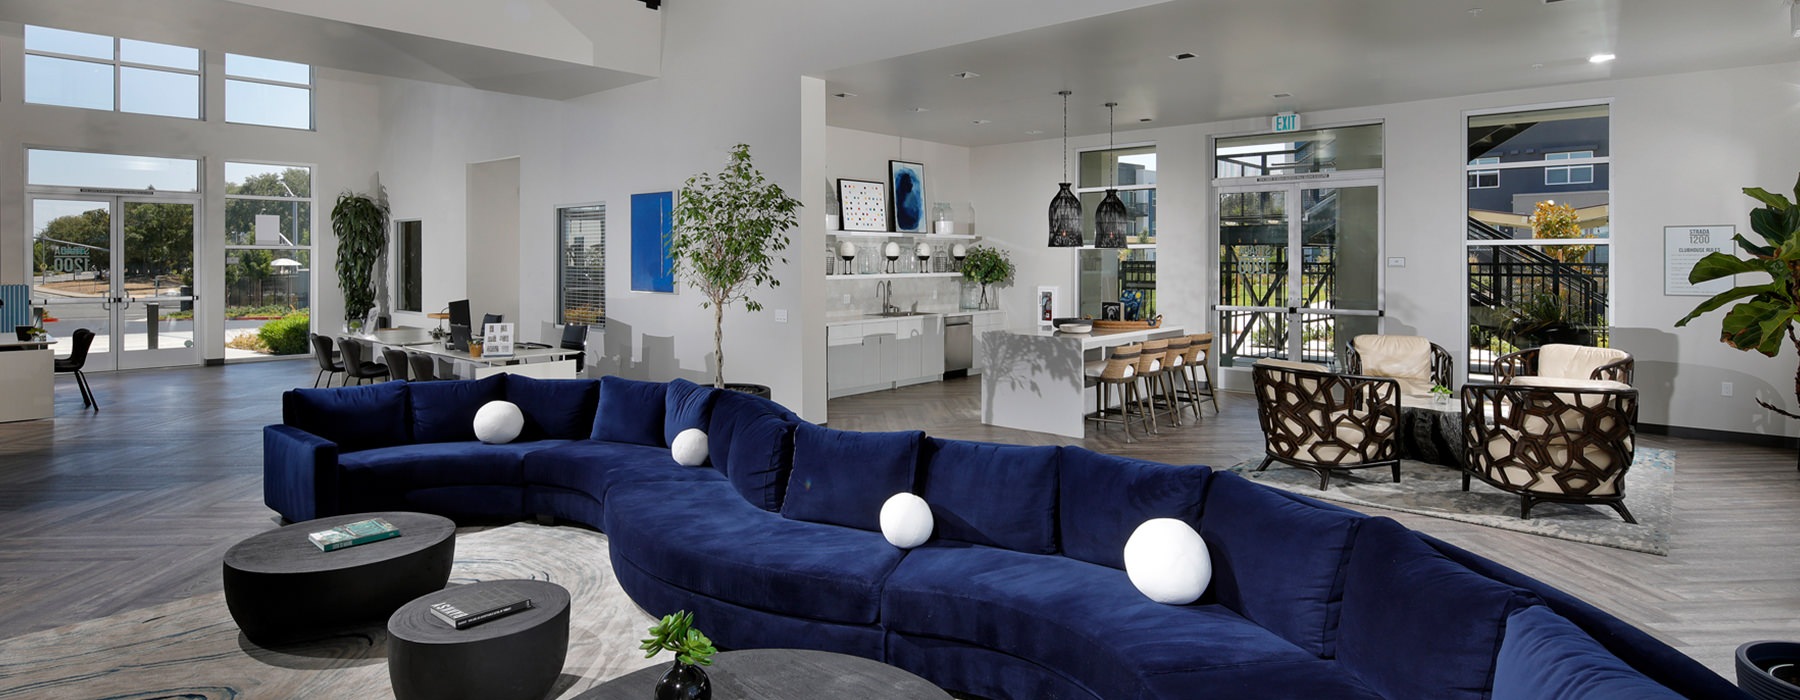 Spacious and well lit clubhouse with large blue couch